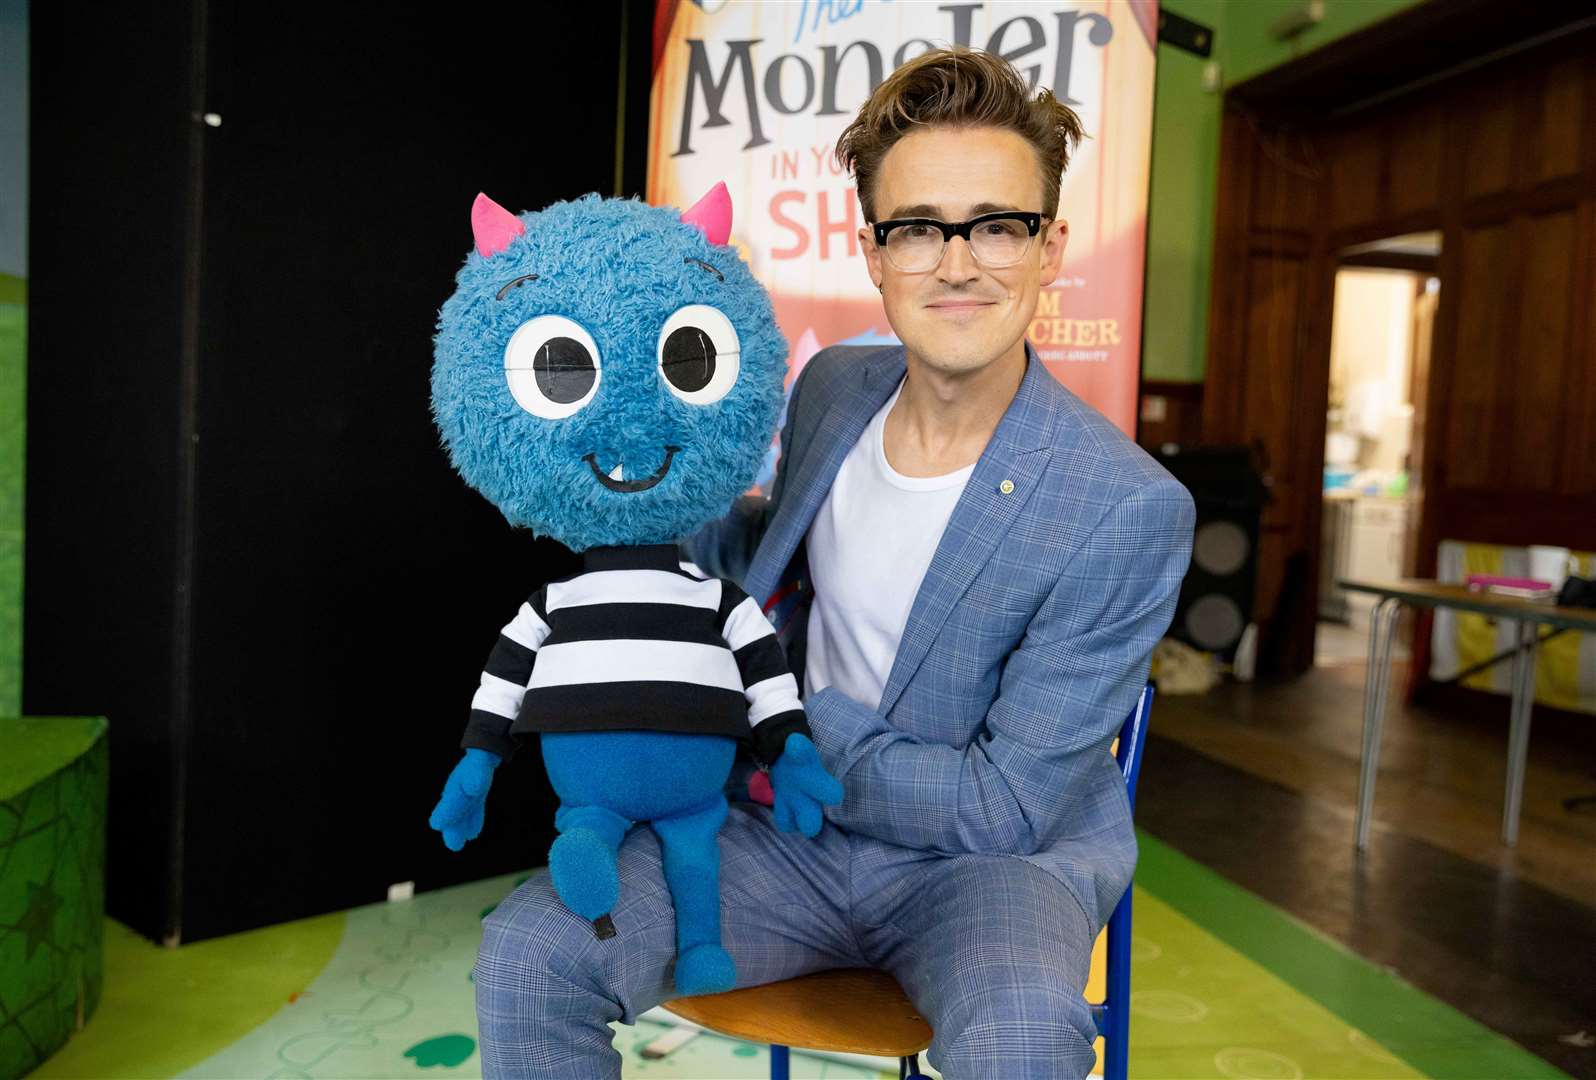 McFly frontman Tom Fletcher with the Little Monster puppet used in the live adaptation of his best-selling picture book